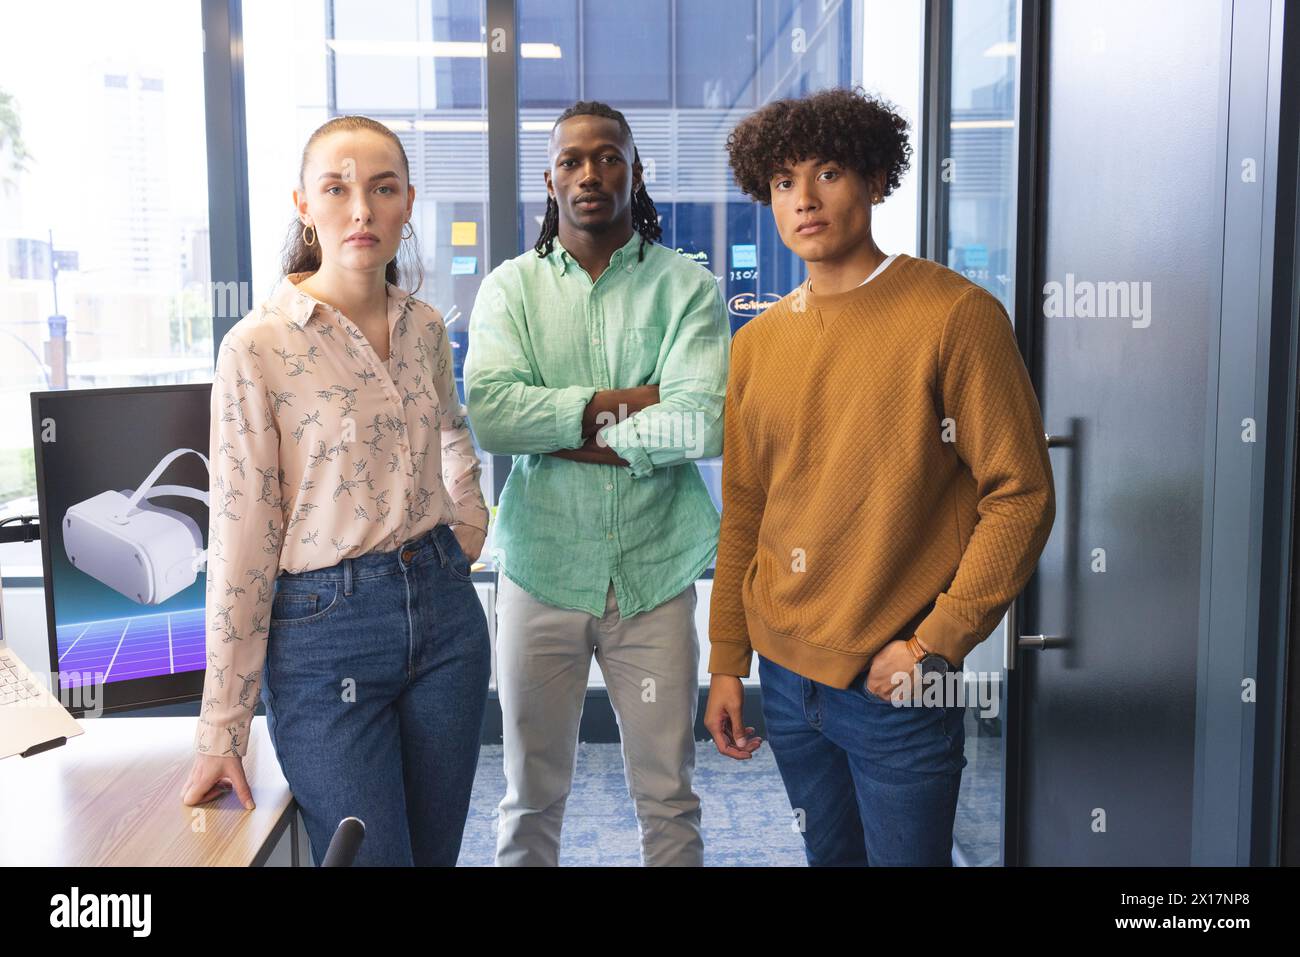 Diverse team standing in office, looking serious Stock Photo